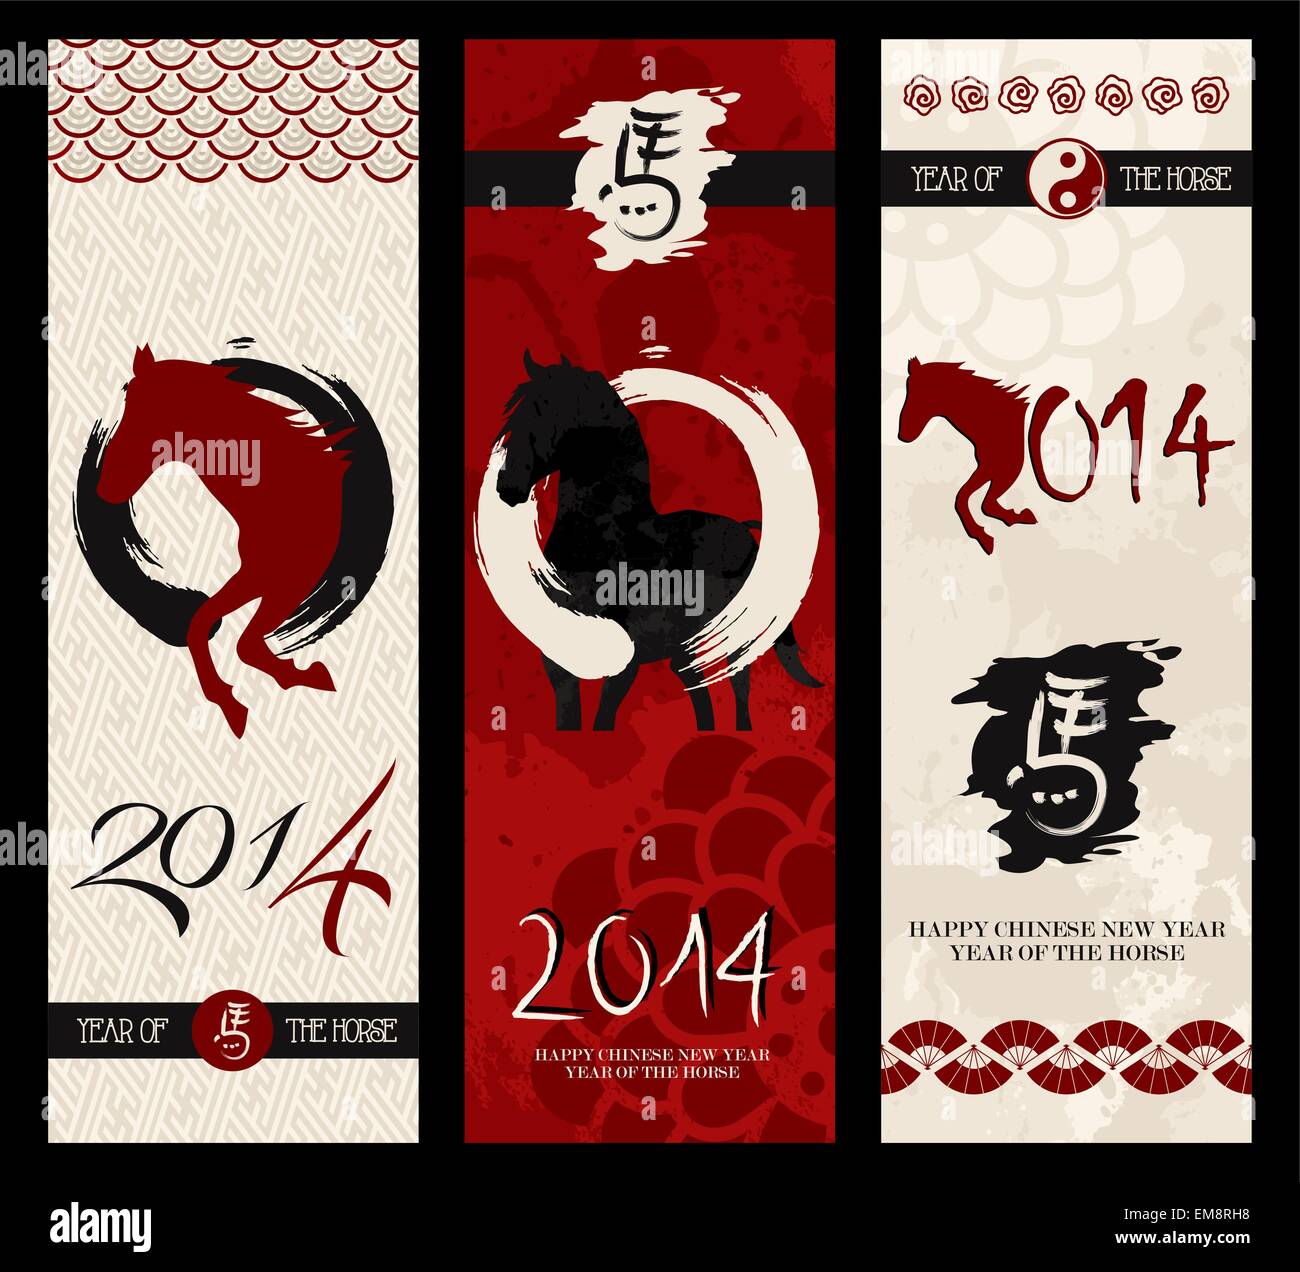 Chinese new year of the Horse web banners set. Stock Vector